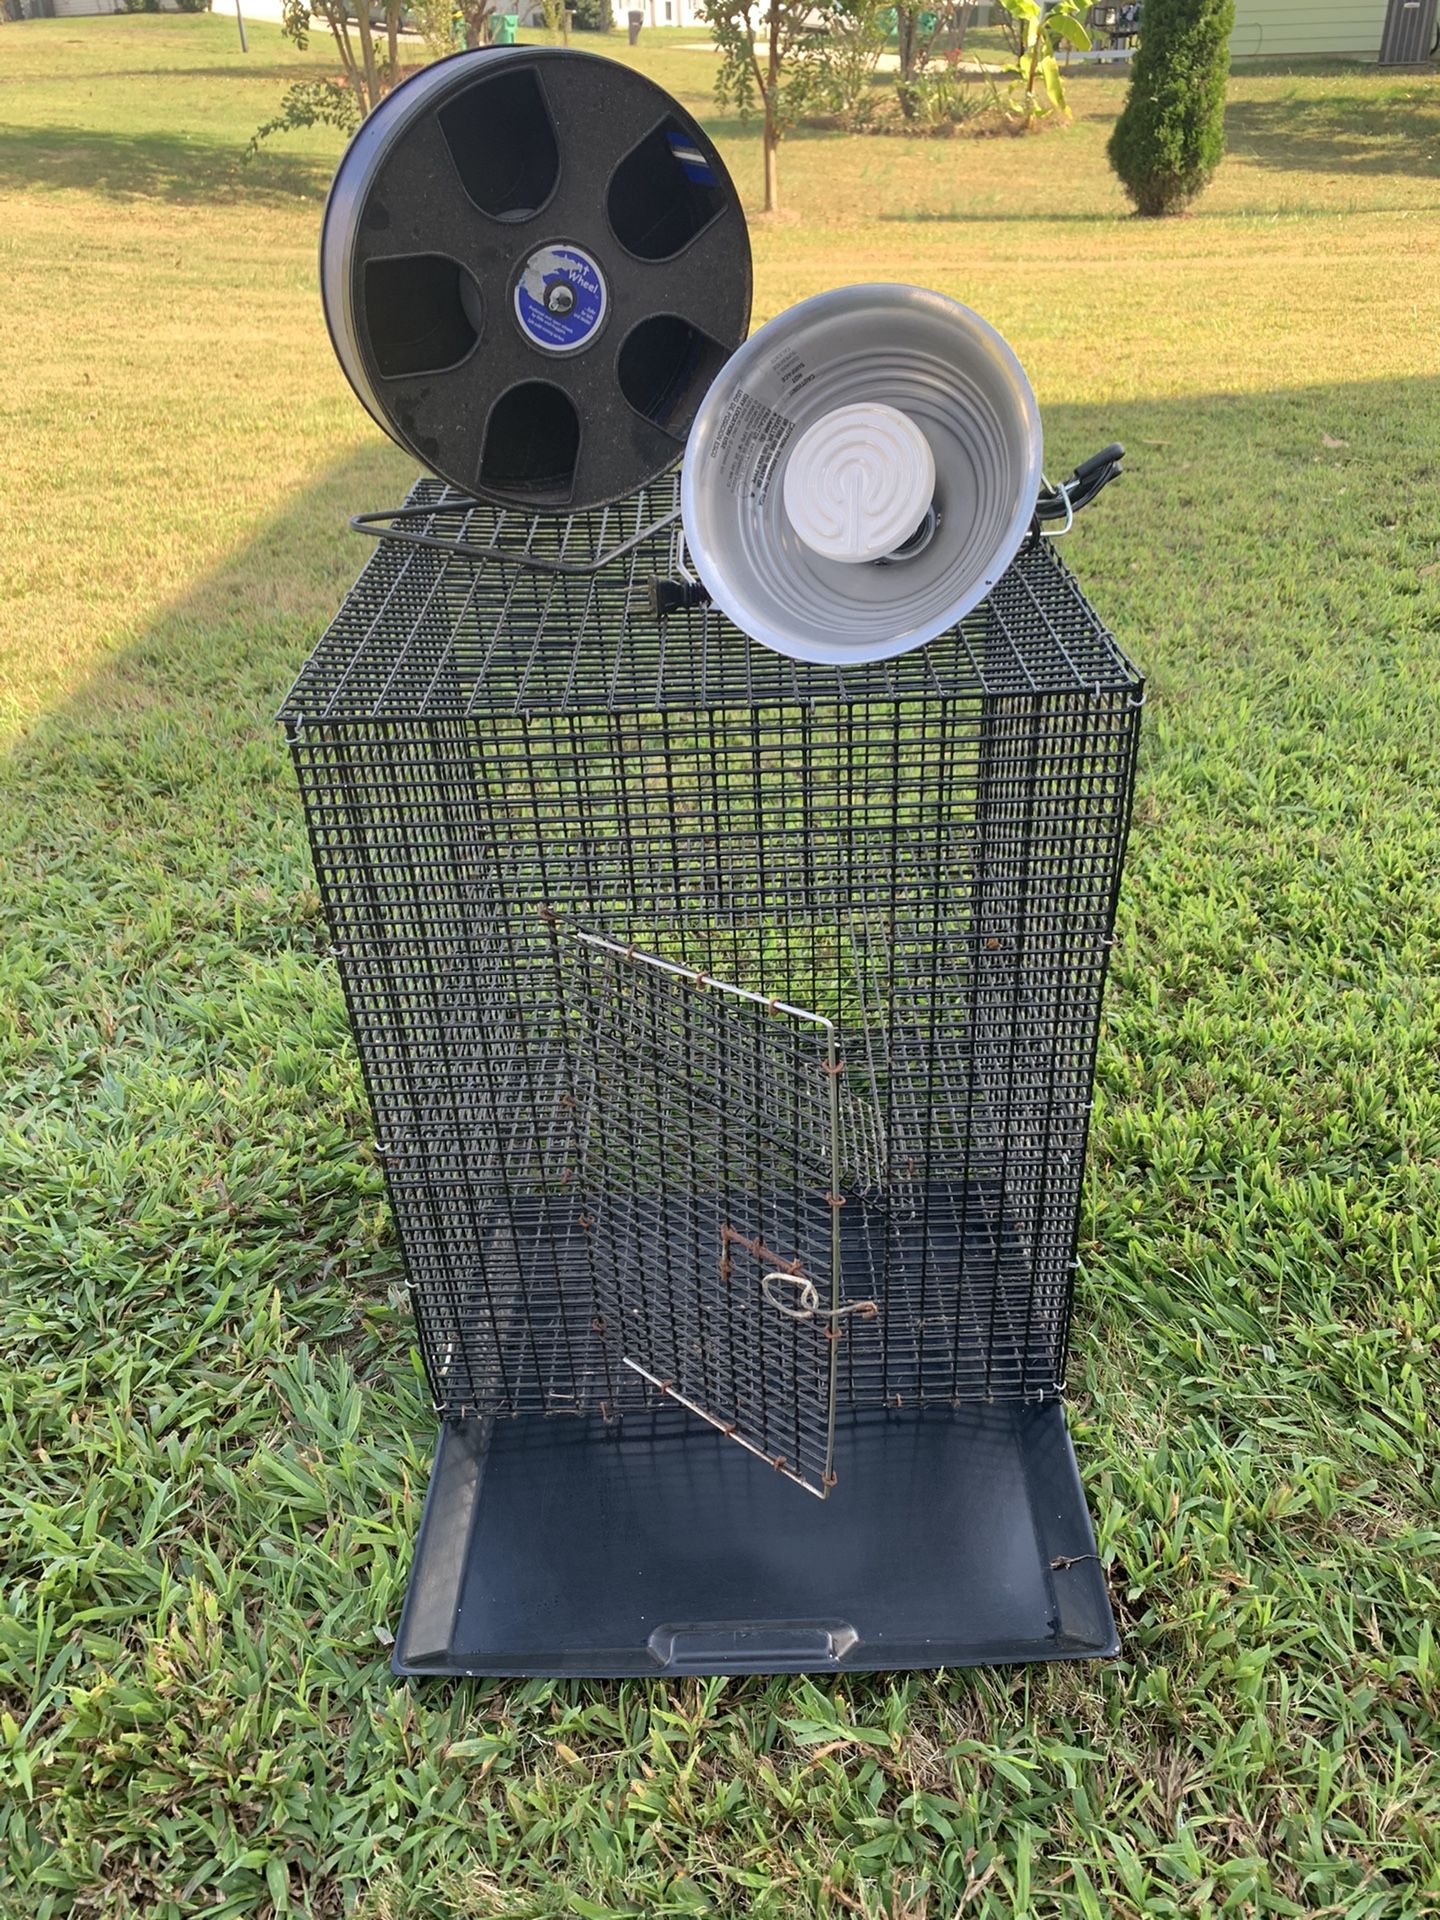 Sugar Glider or Small Pet Cage with Sugar Glider Heat Lamp and Wheel